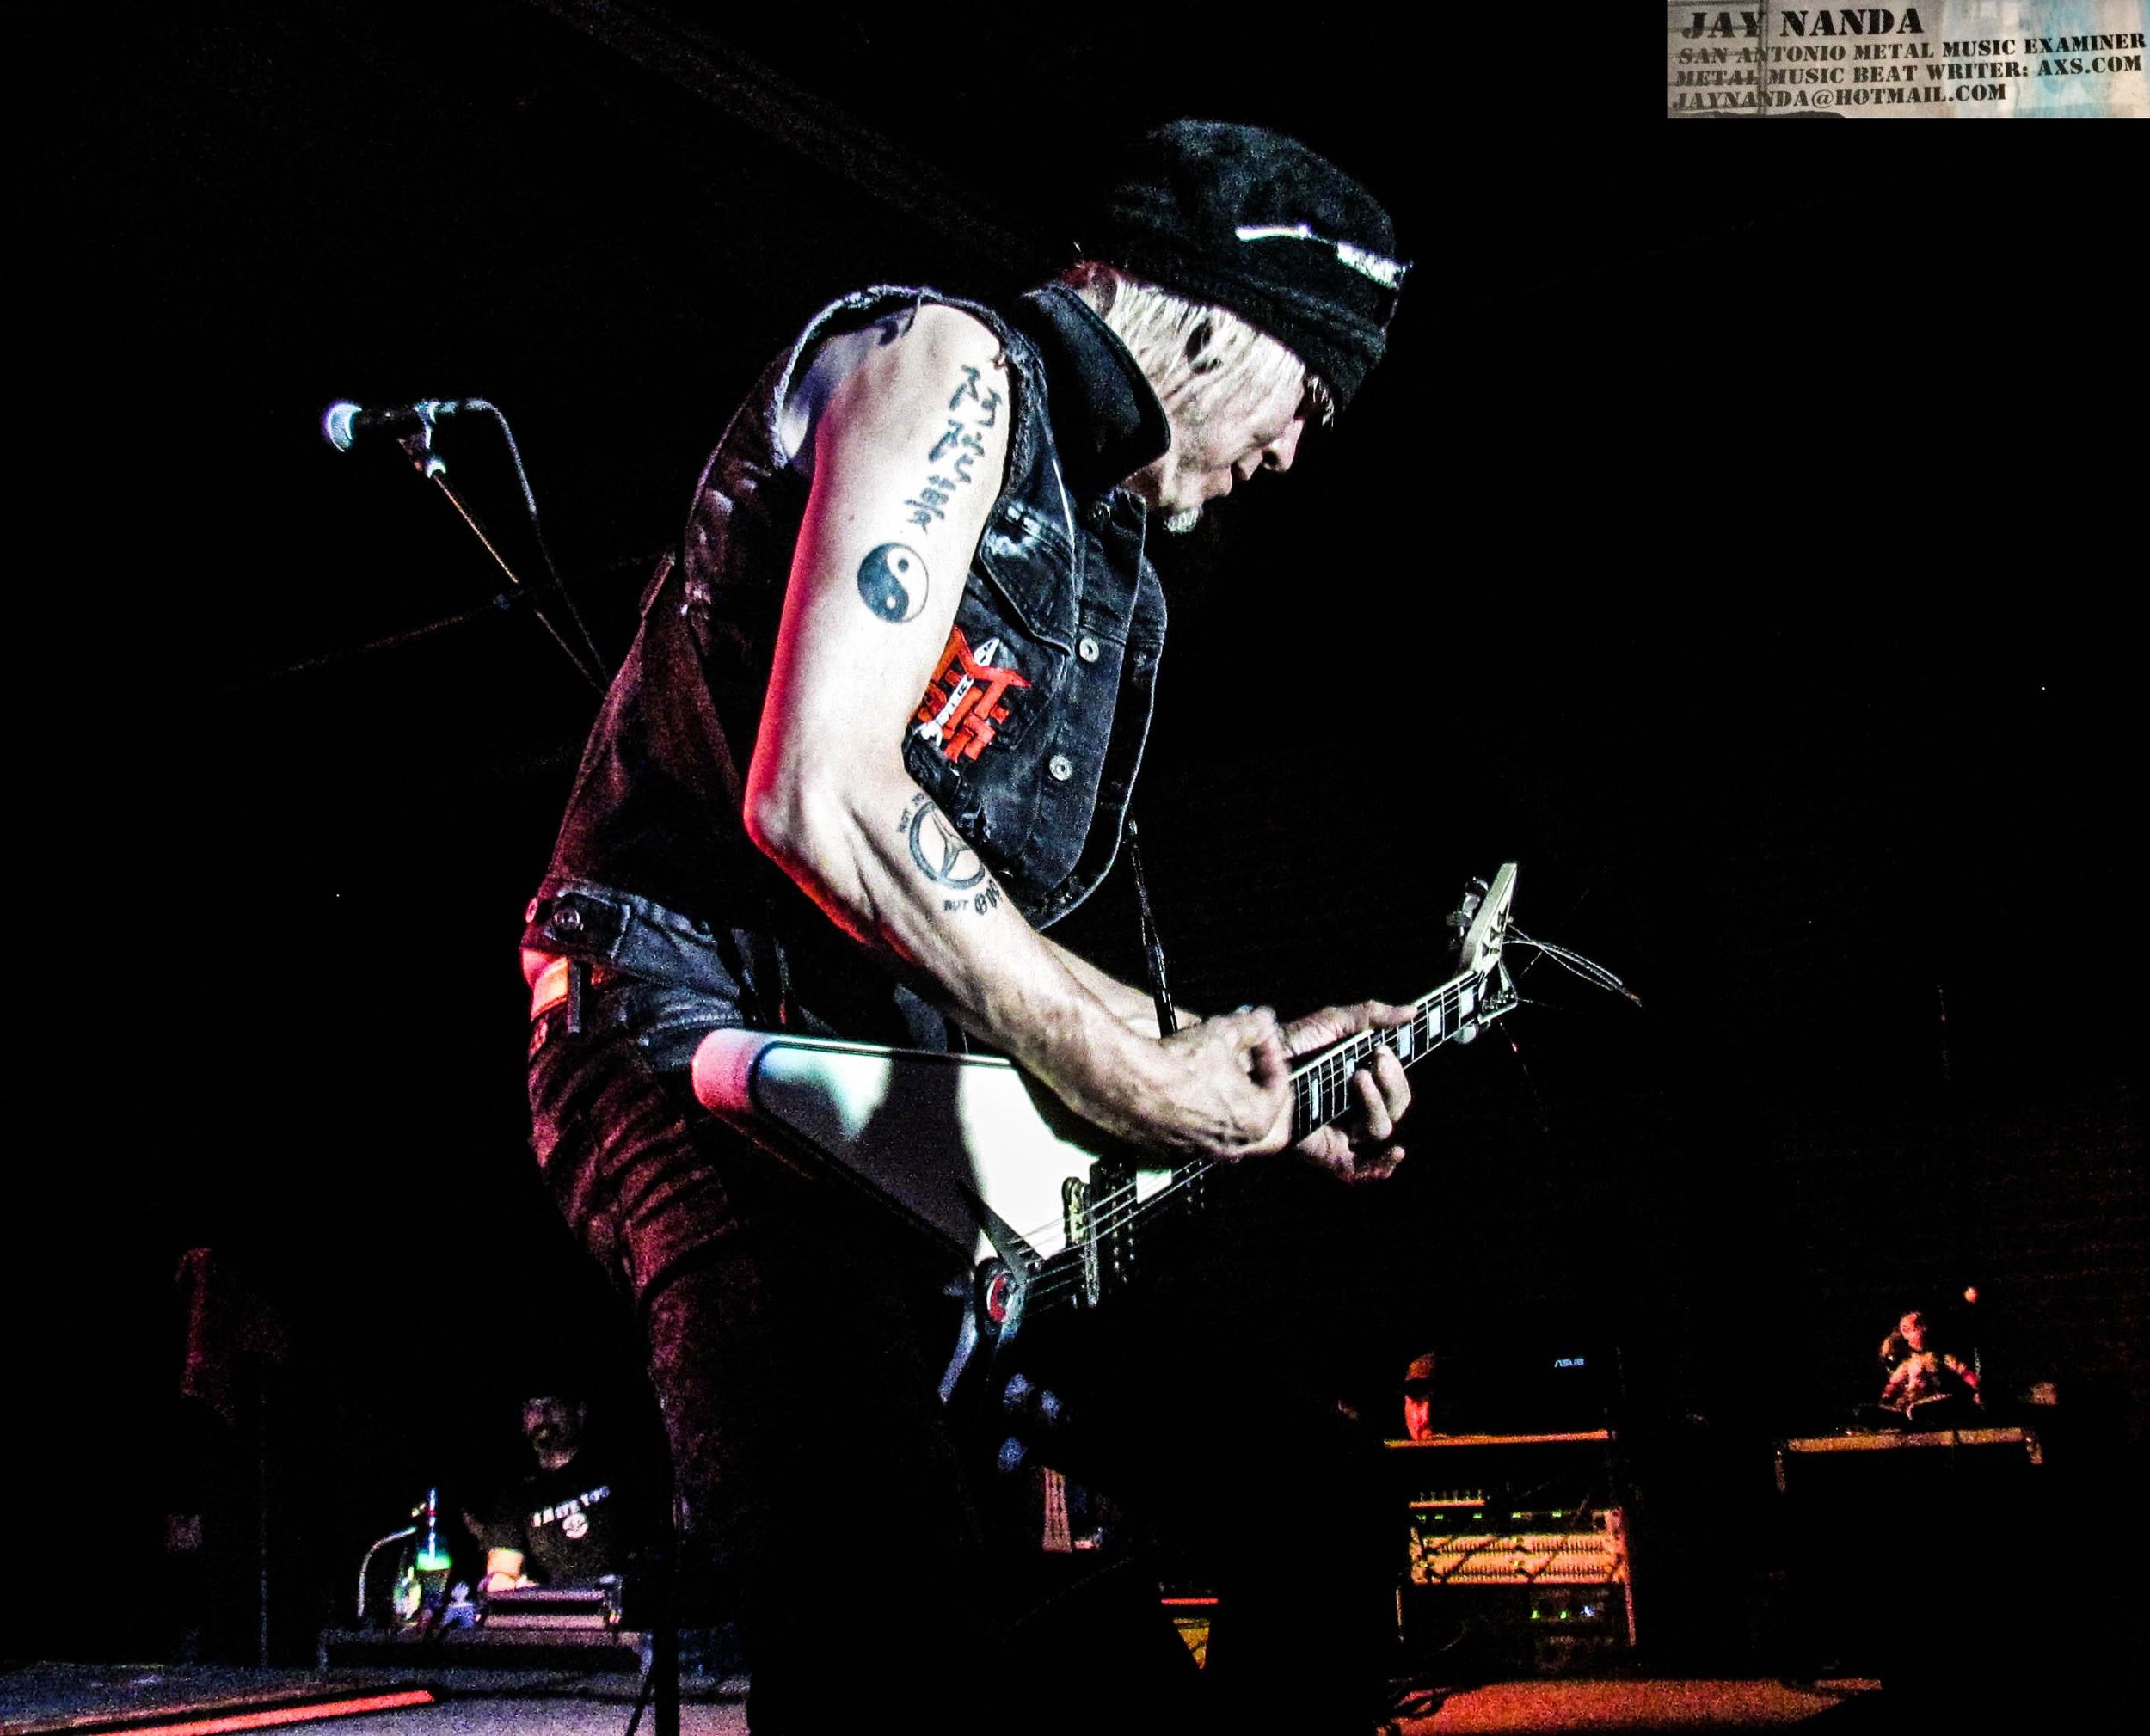  Schenker showcases his signature style on guitar. 